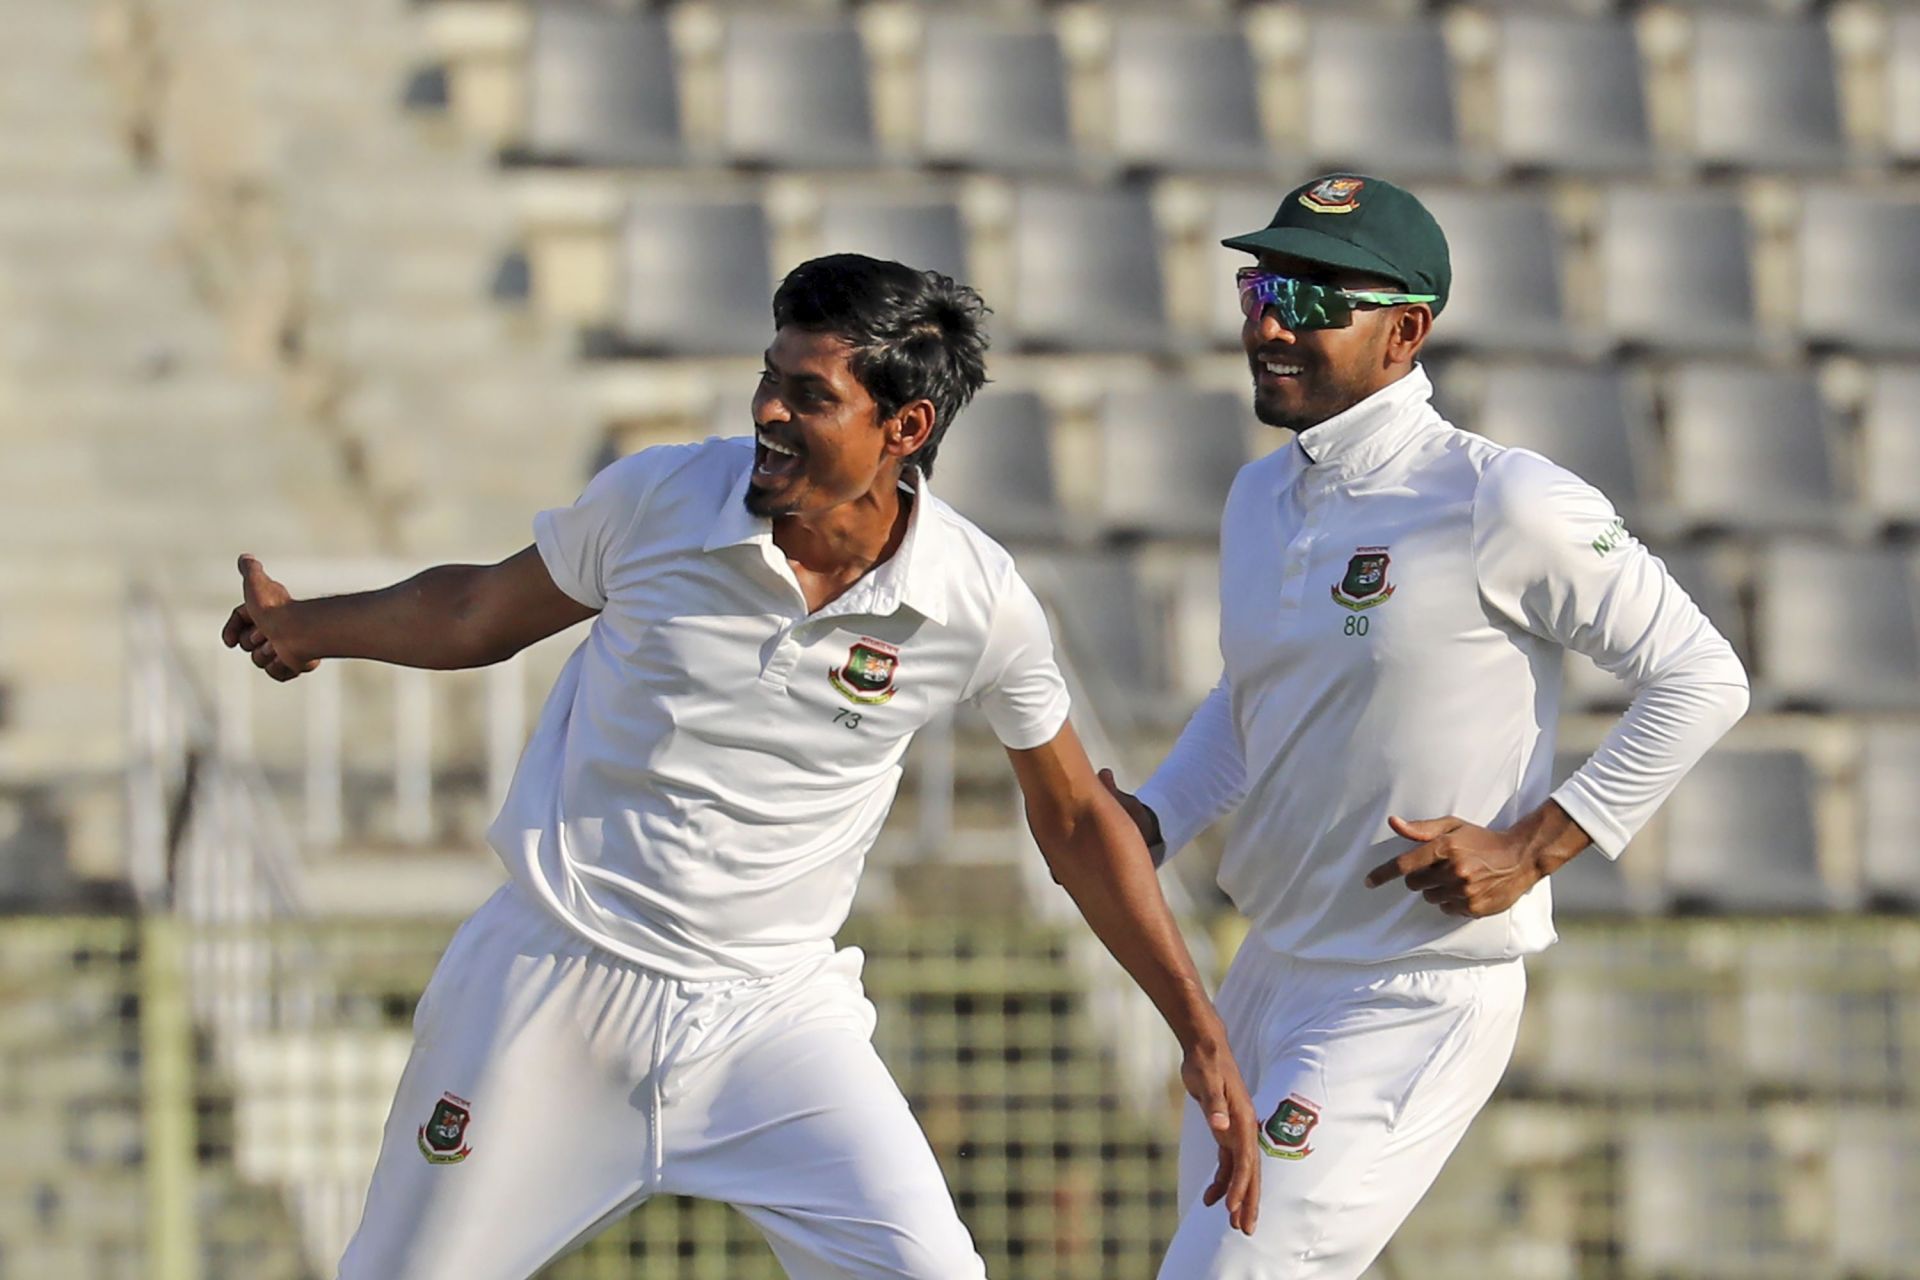 Taijul Ismal celebrating a wicket vs NZ in Sylhet [Getty Images]